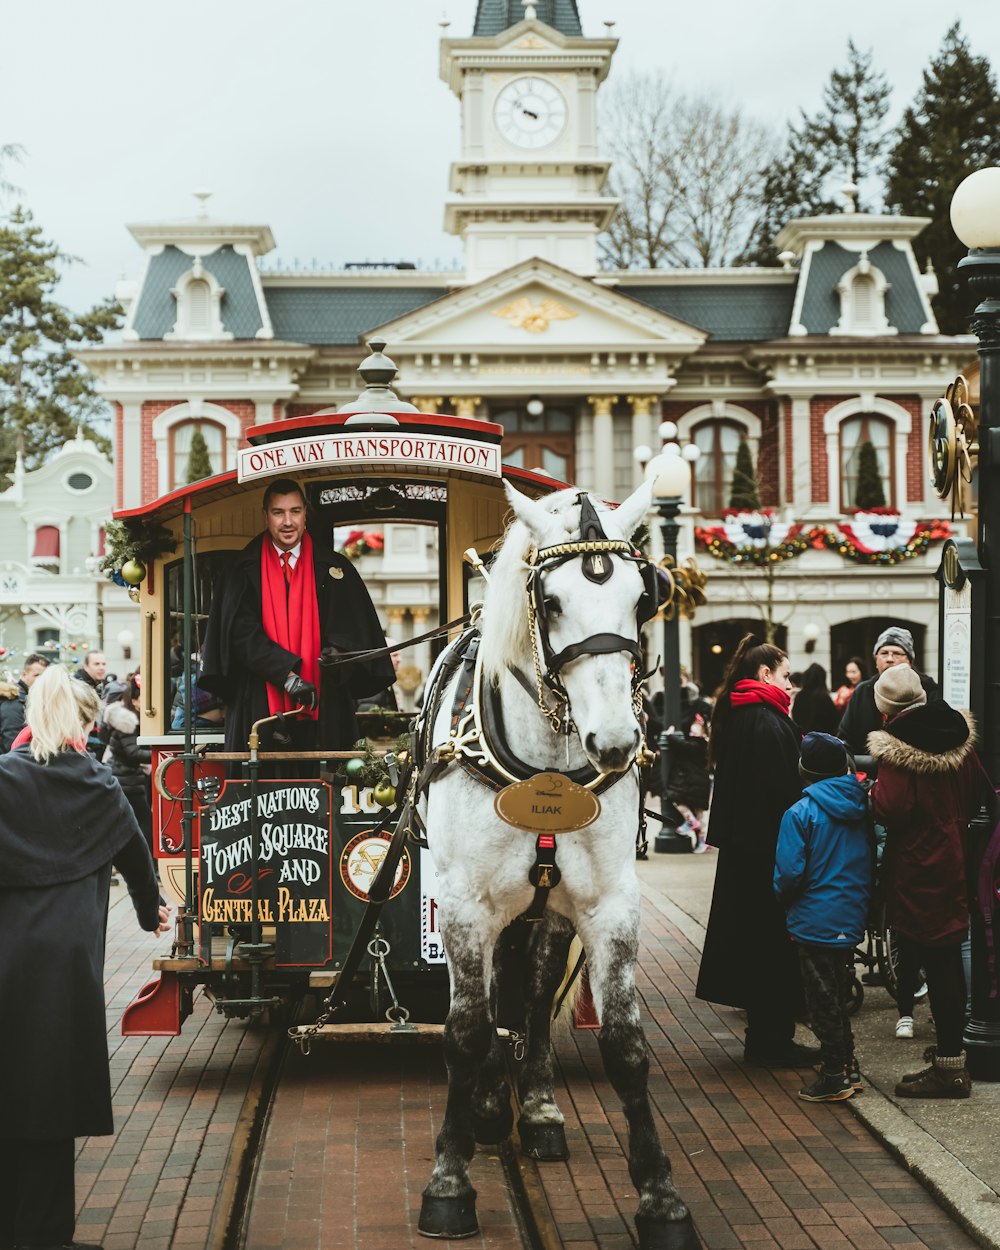 a white horse pulling a carriage down a street